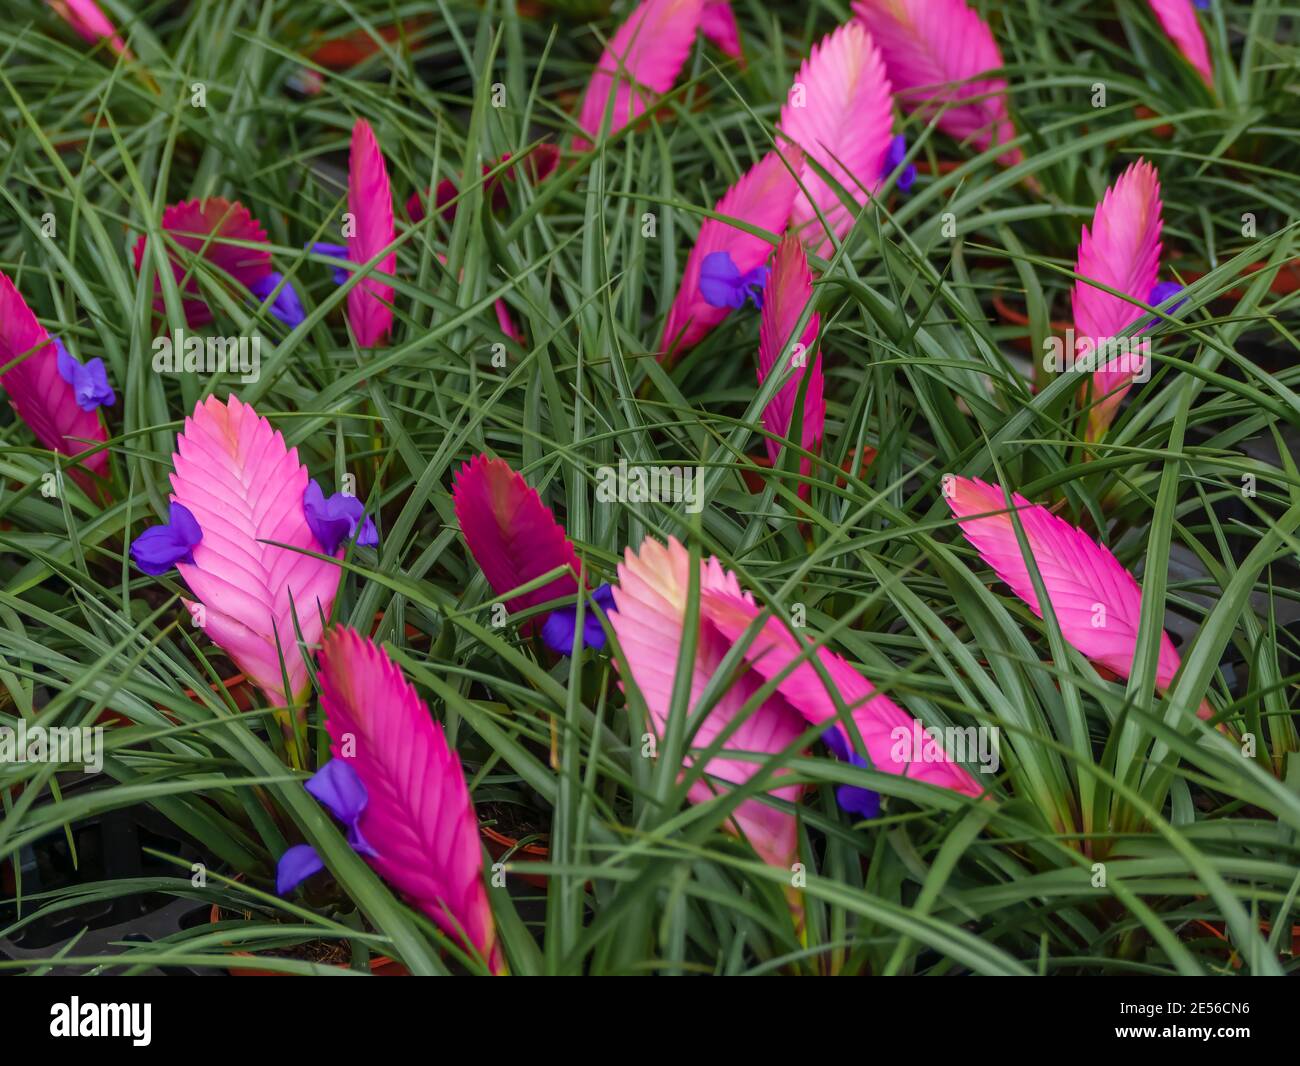 Tillandsia, Pink Quill Plant, Tillandsia cyanea, Tillandsia lindenii. Evergreen, perennial flowering plant in the family Bromeliaceae. Close up. Conce Stock Photo